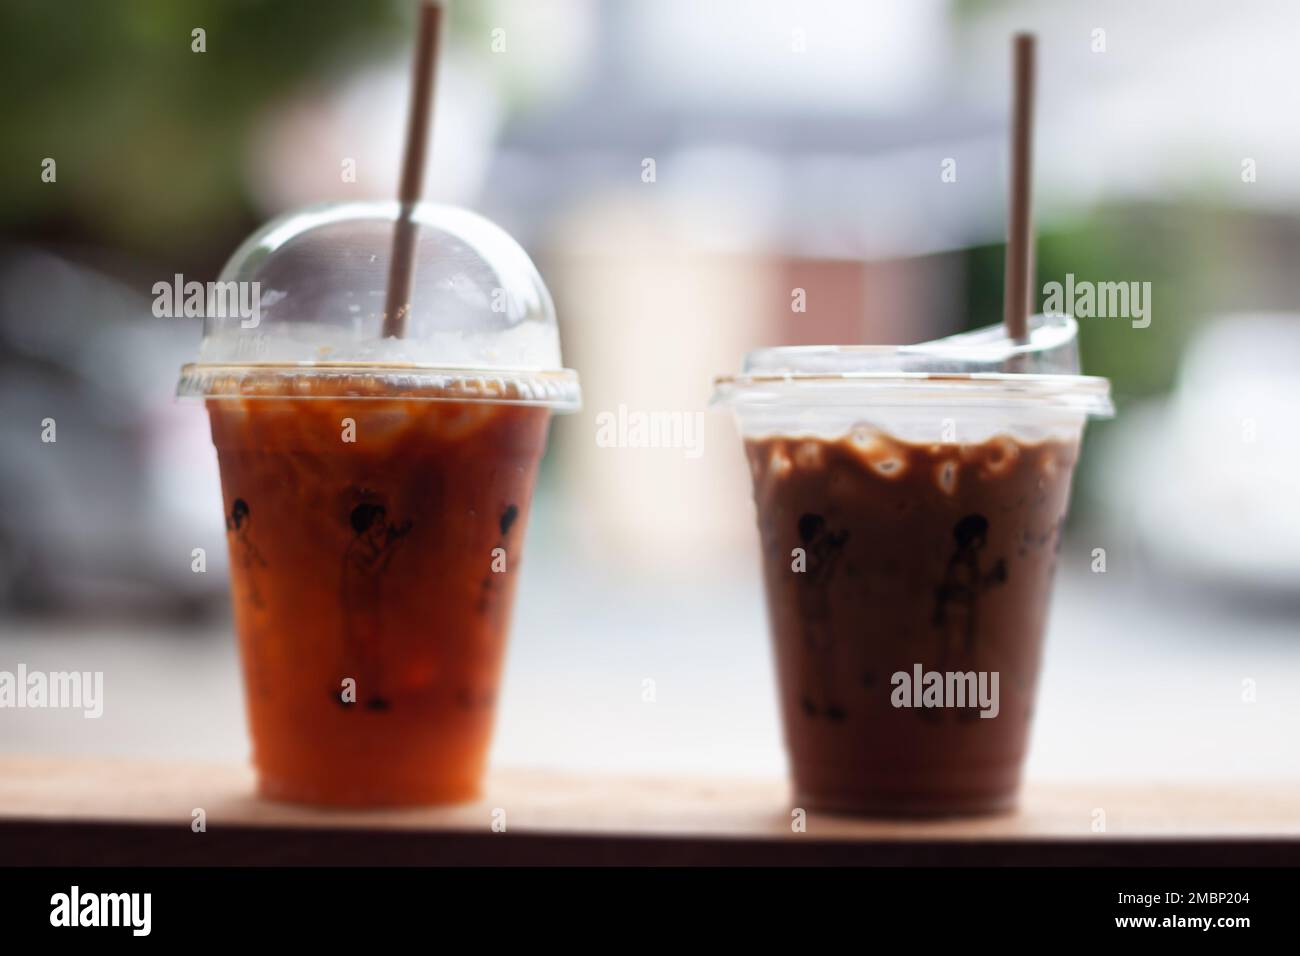 Black coffee with orange juice and iced mocha on wooden table, stock photo Stock Photo